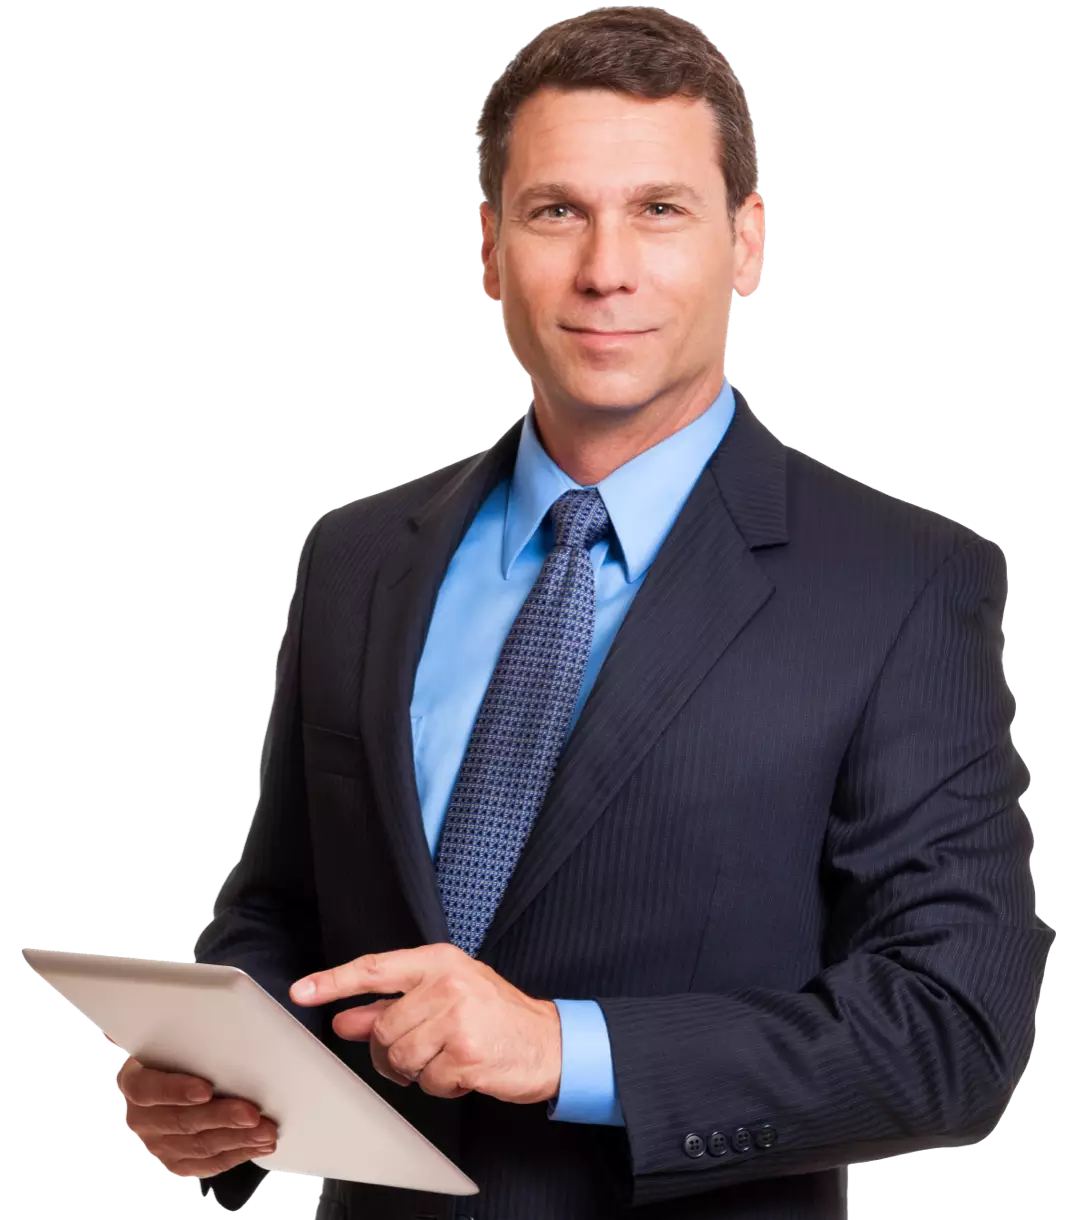 Man in suit using tablet, Form Simplicity for real estate associations